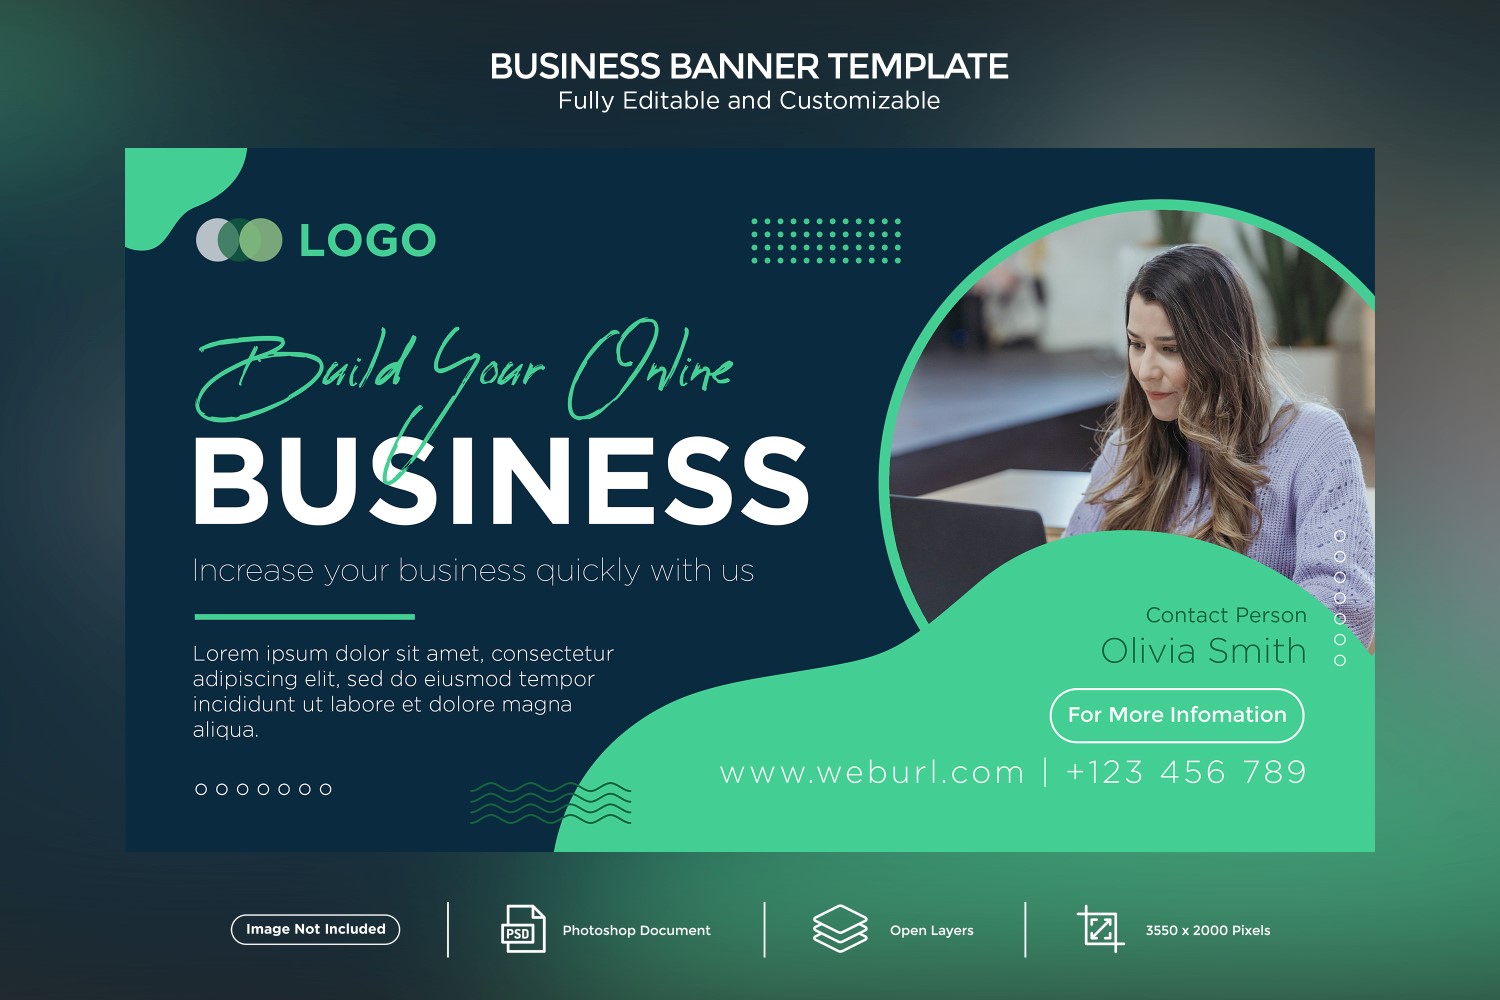 Build your online Business  Banner Design Template.